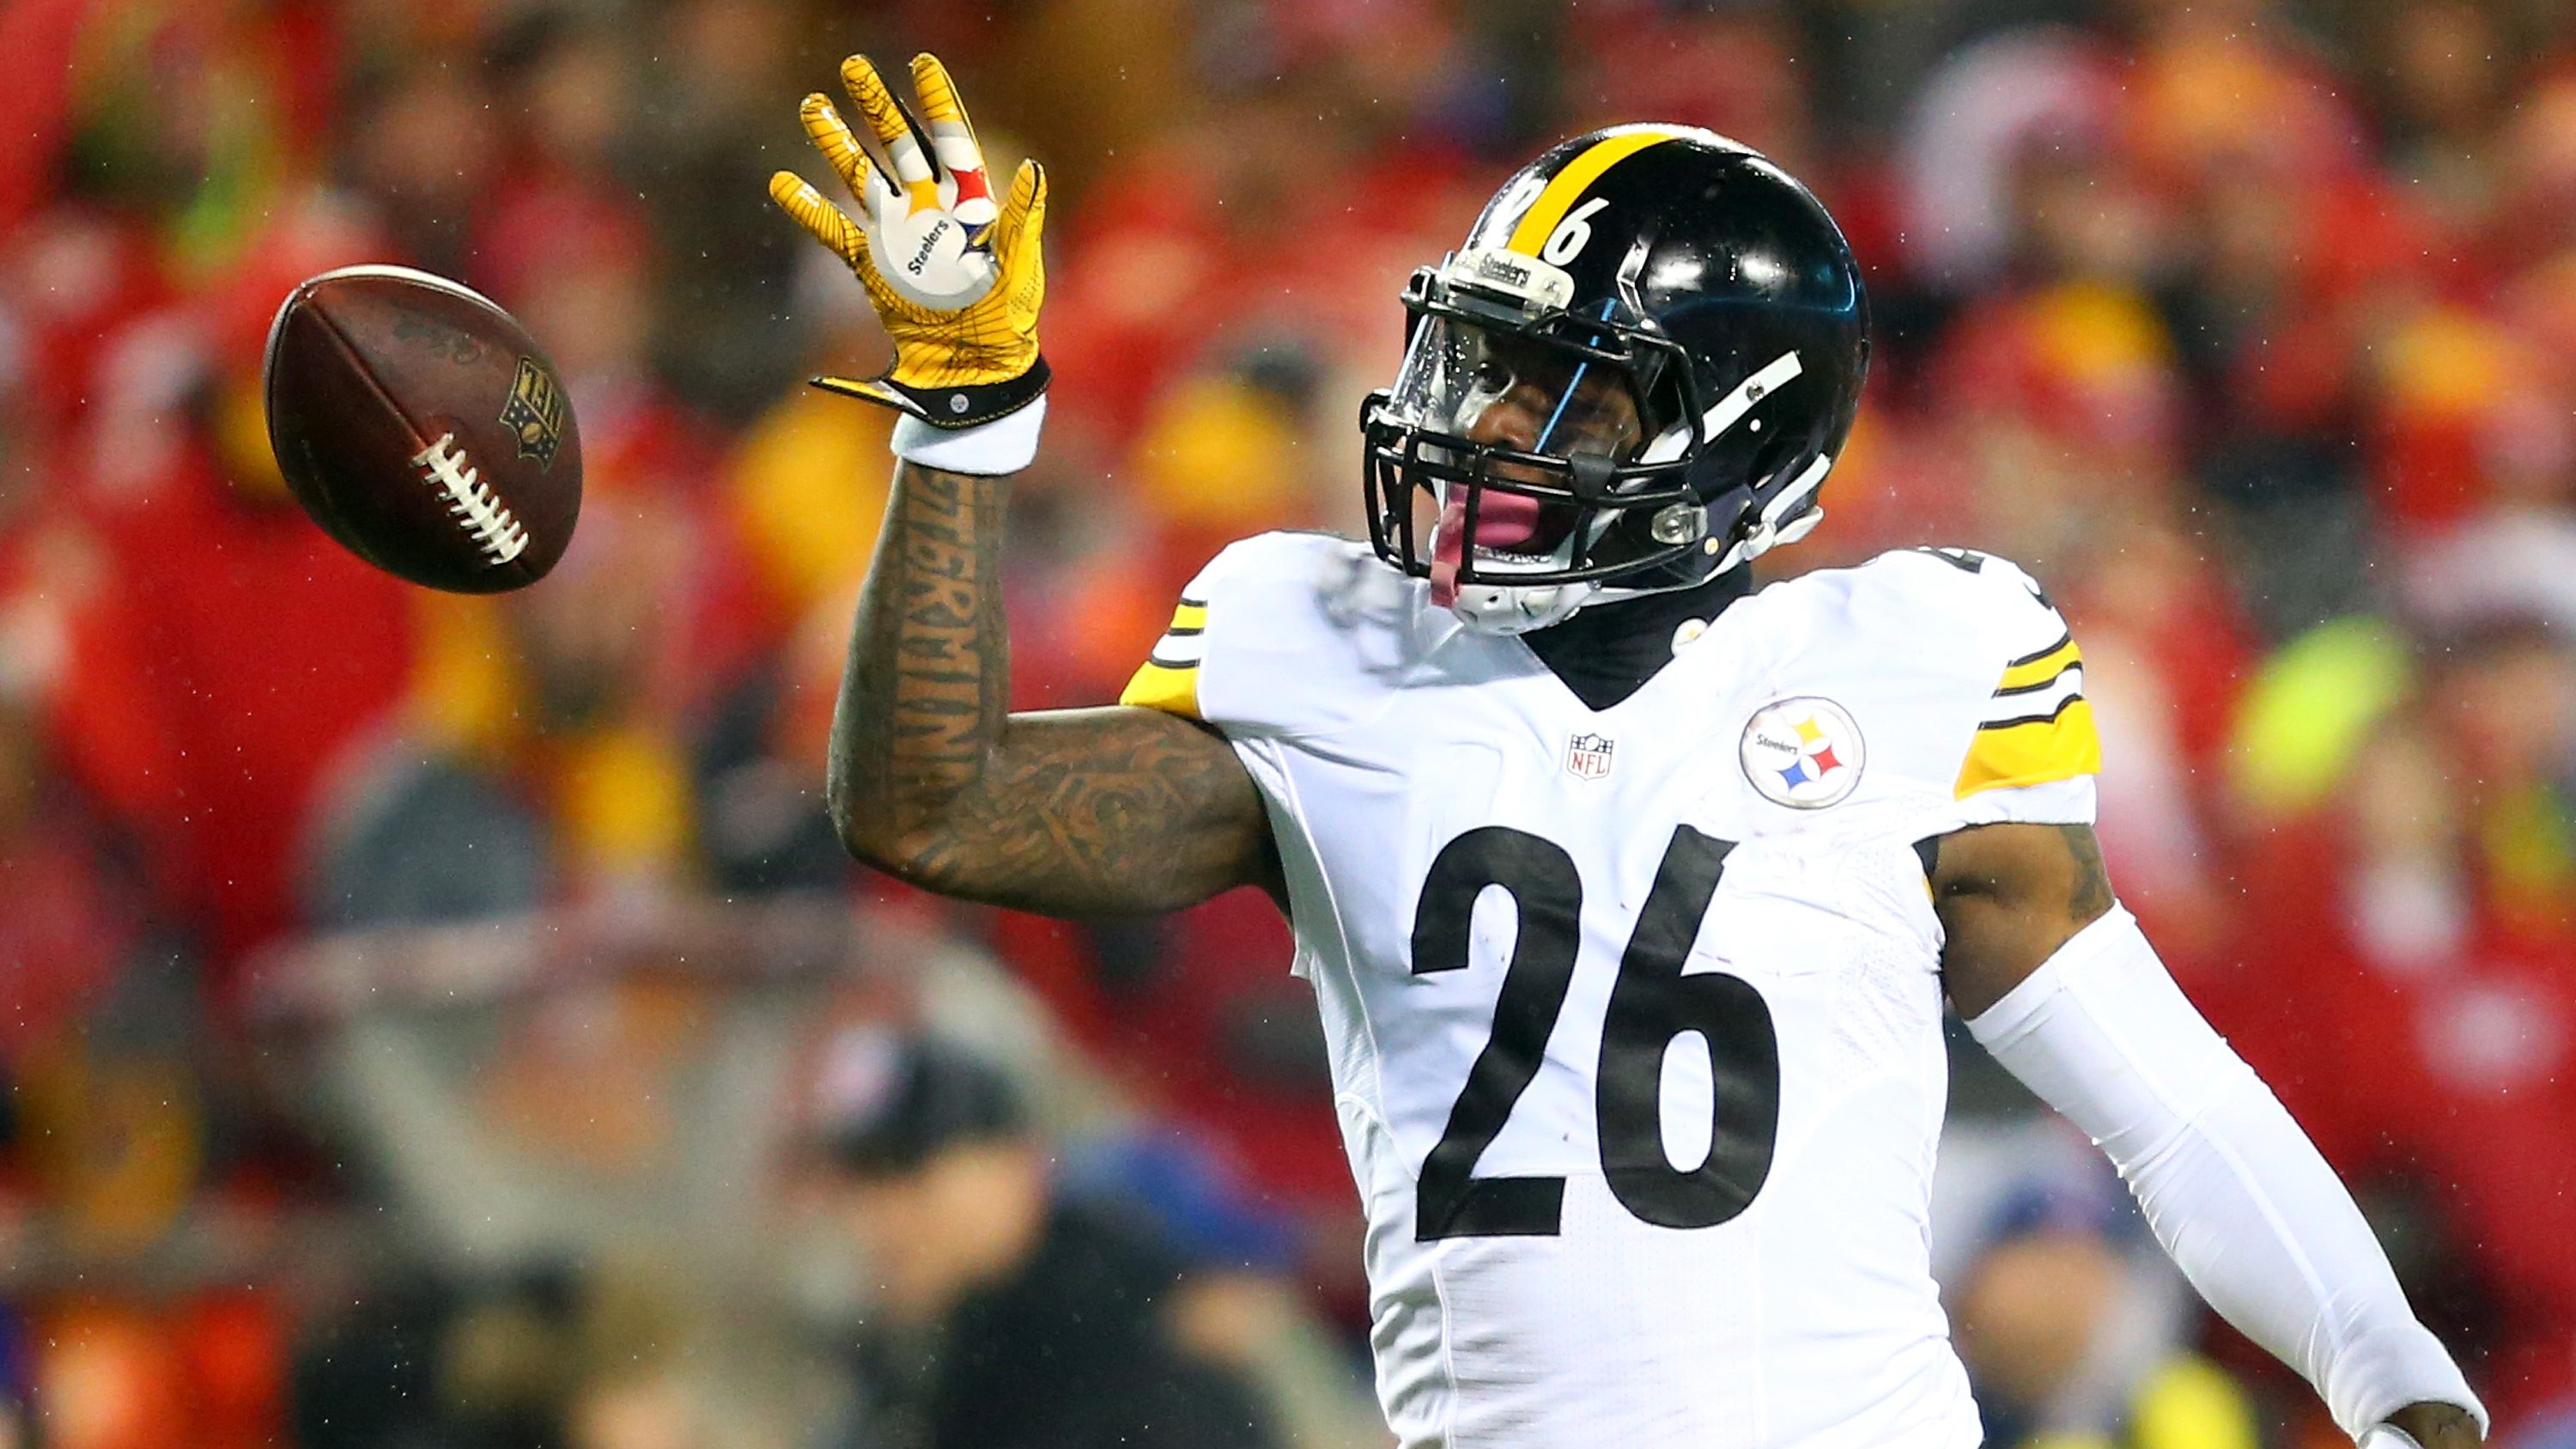 Pittsburgh Steelers on X: We have placed RB Le'Veon Bell on the